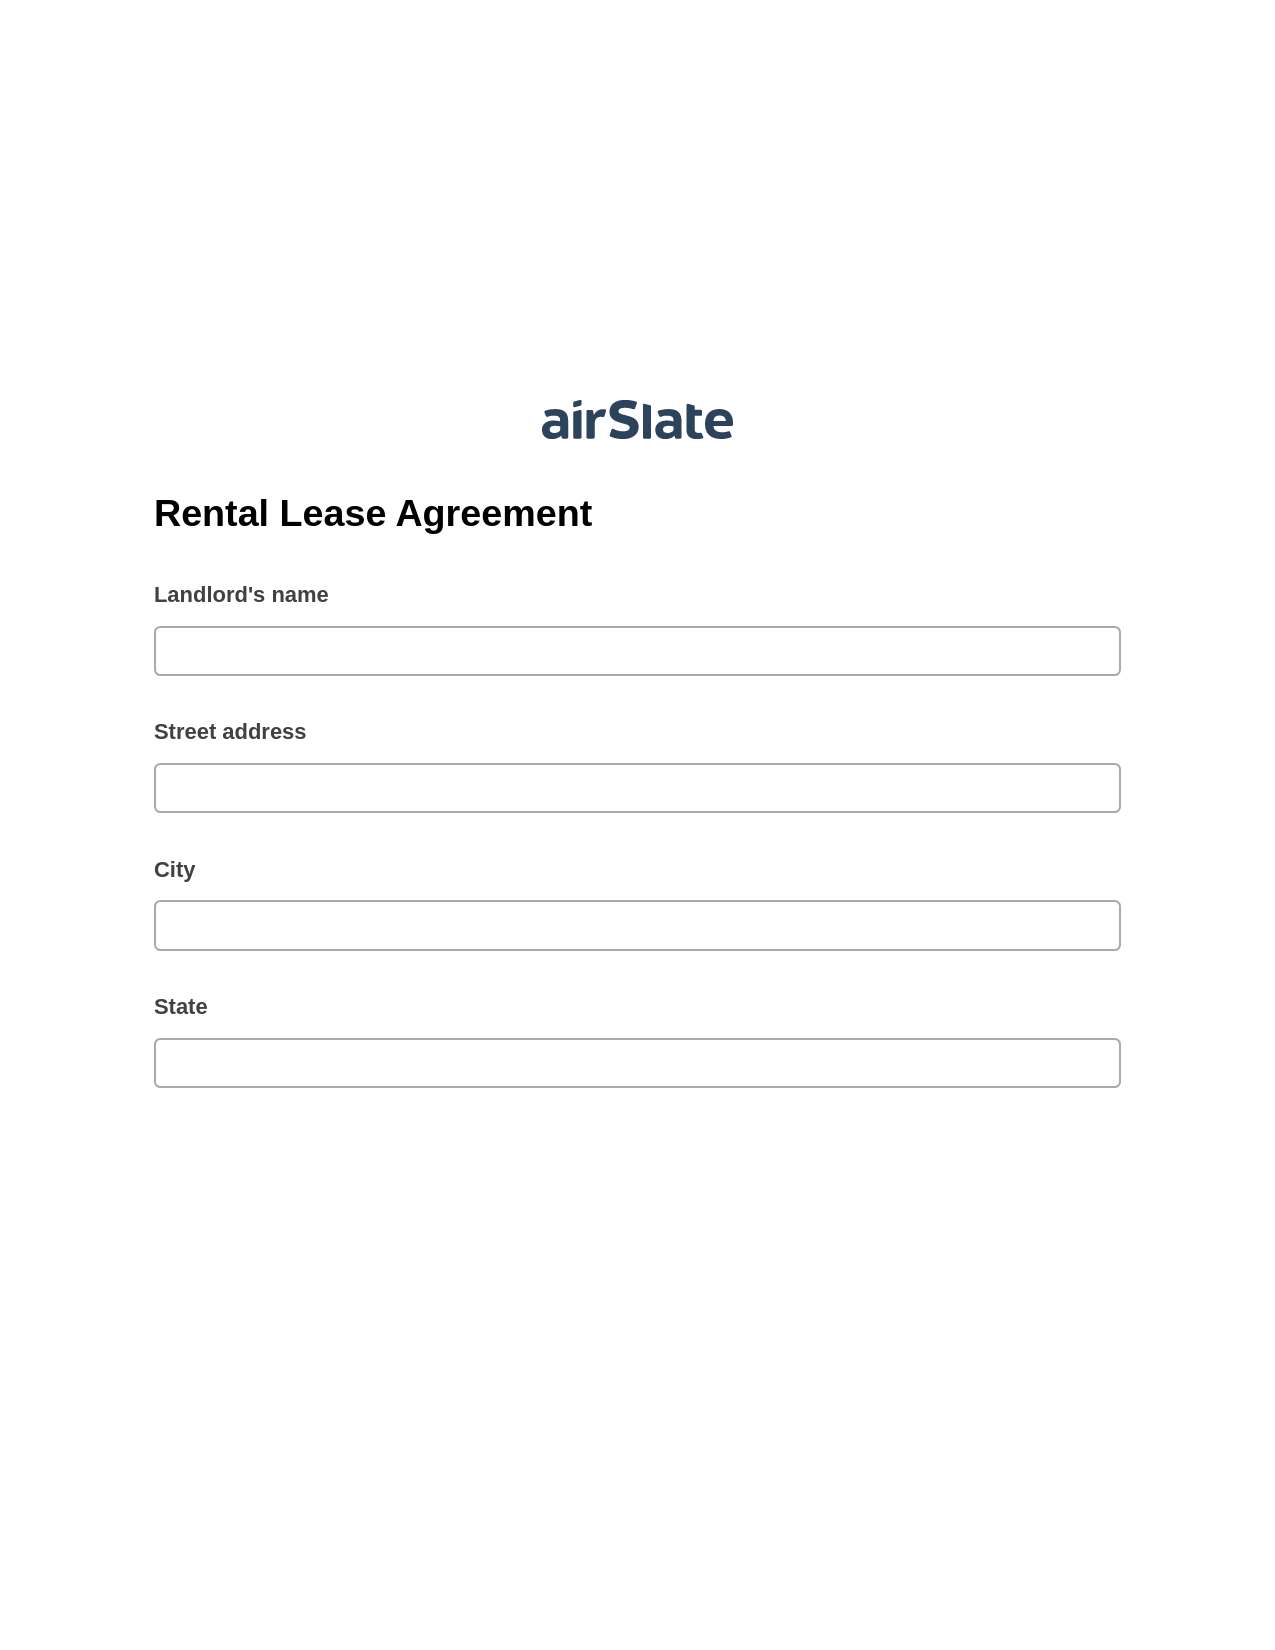 Rental Lease Agreement Pre-fill from Excel Spreadsheet Bot, Update MS Dynamics 365 Record Bot, Export to MySQL Bot